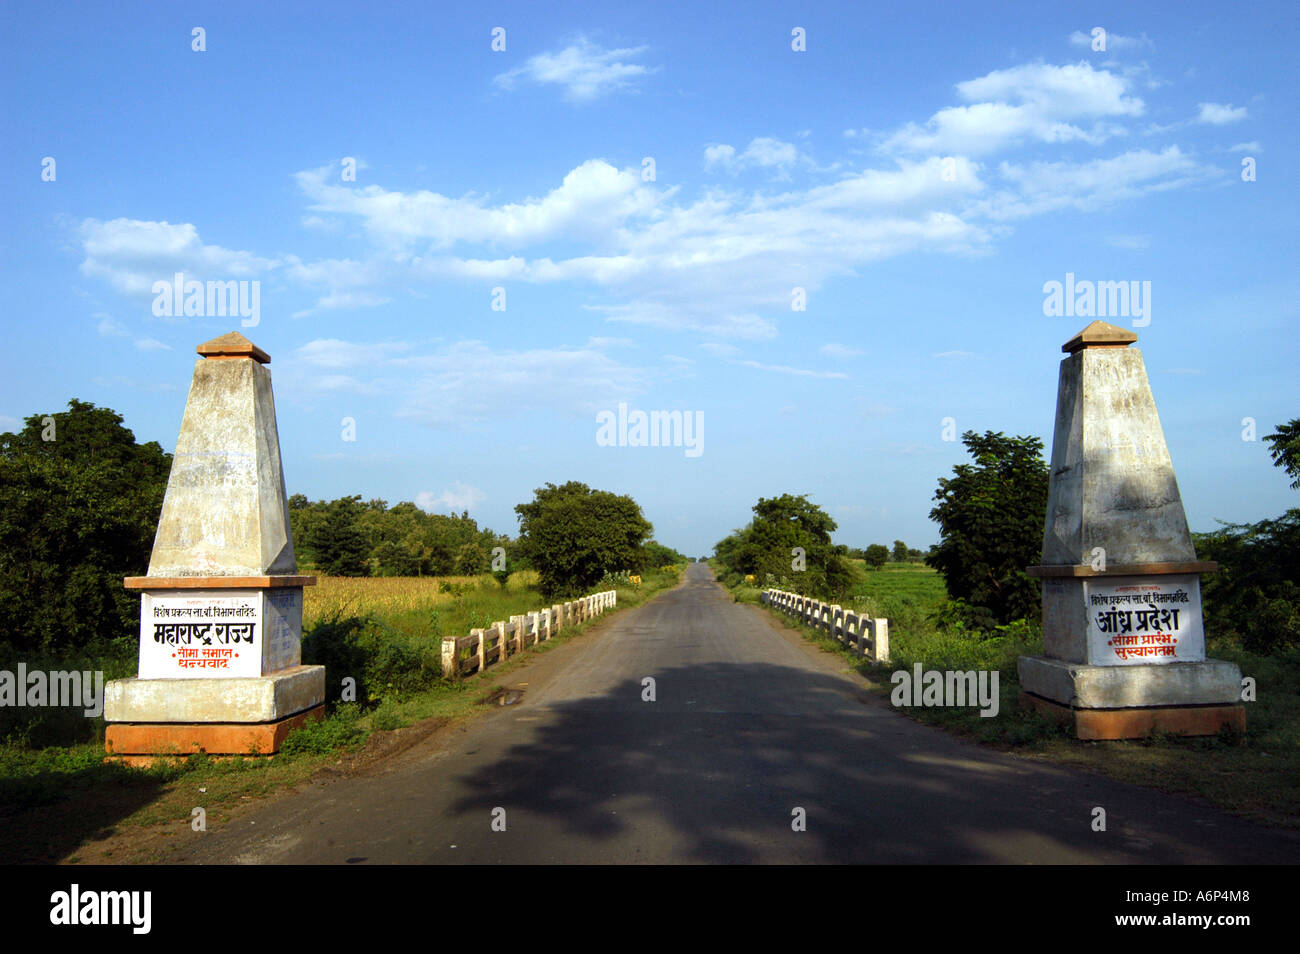 Two indicator pillars on either side of road marking boundary of Maharashtra and Andhra Pradesh state India Stock Photo